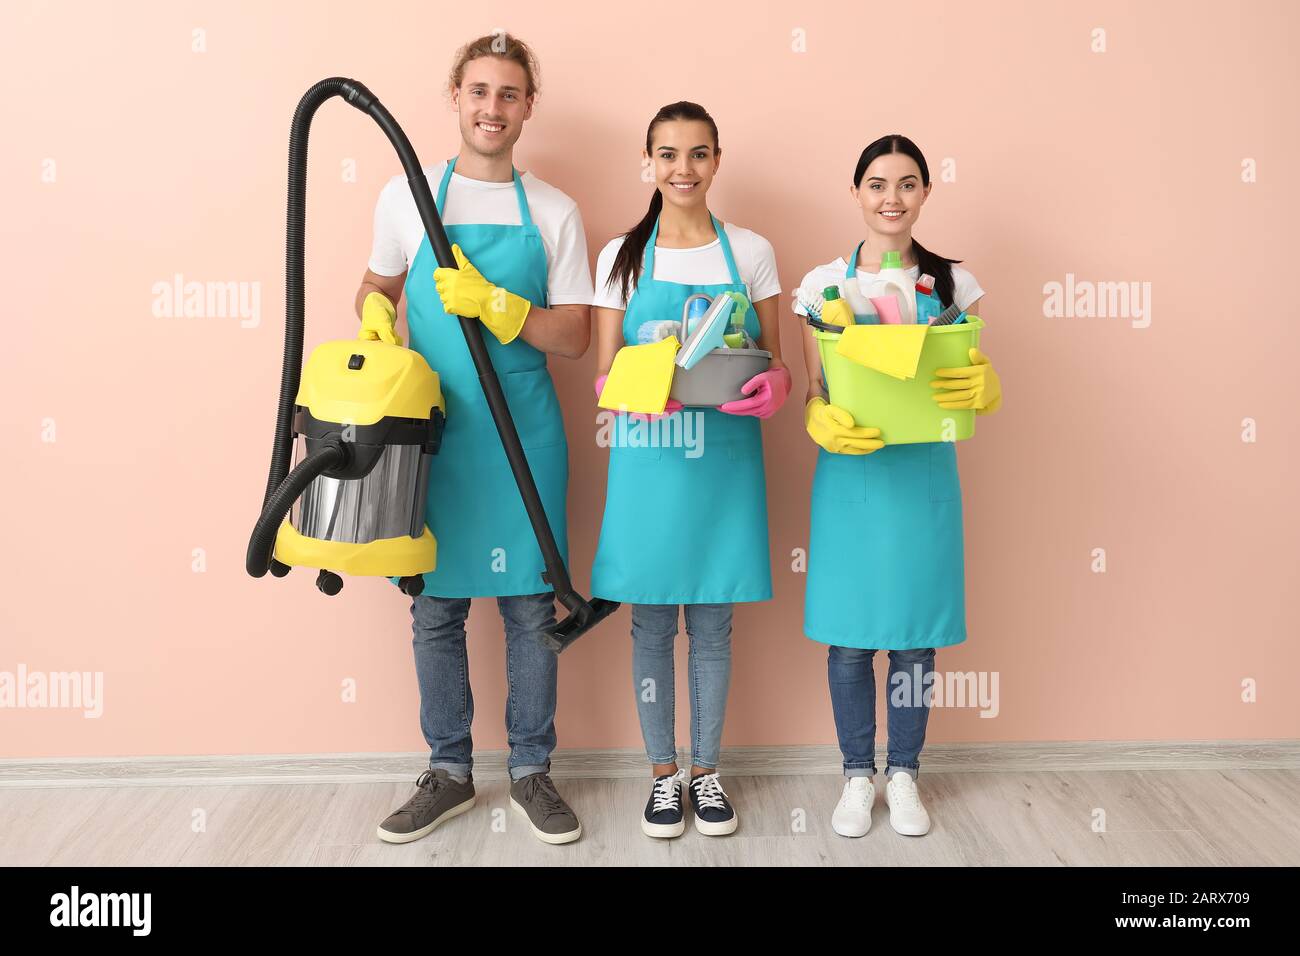 Team of janitors with cleaning supplies near color wall Stock Photo